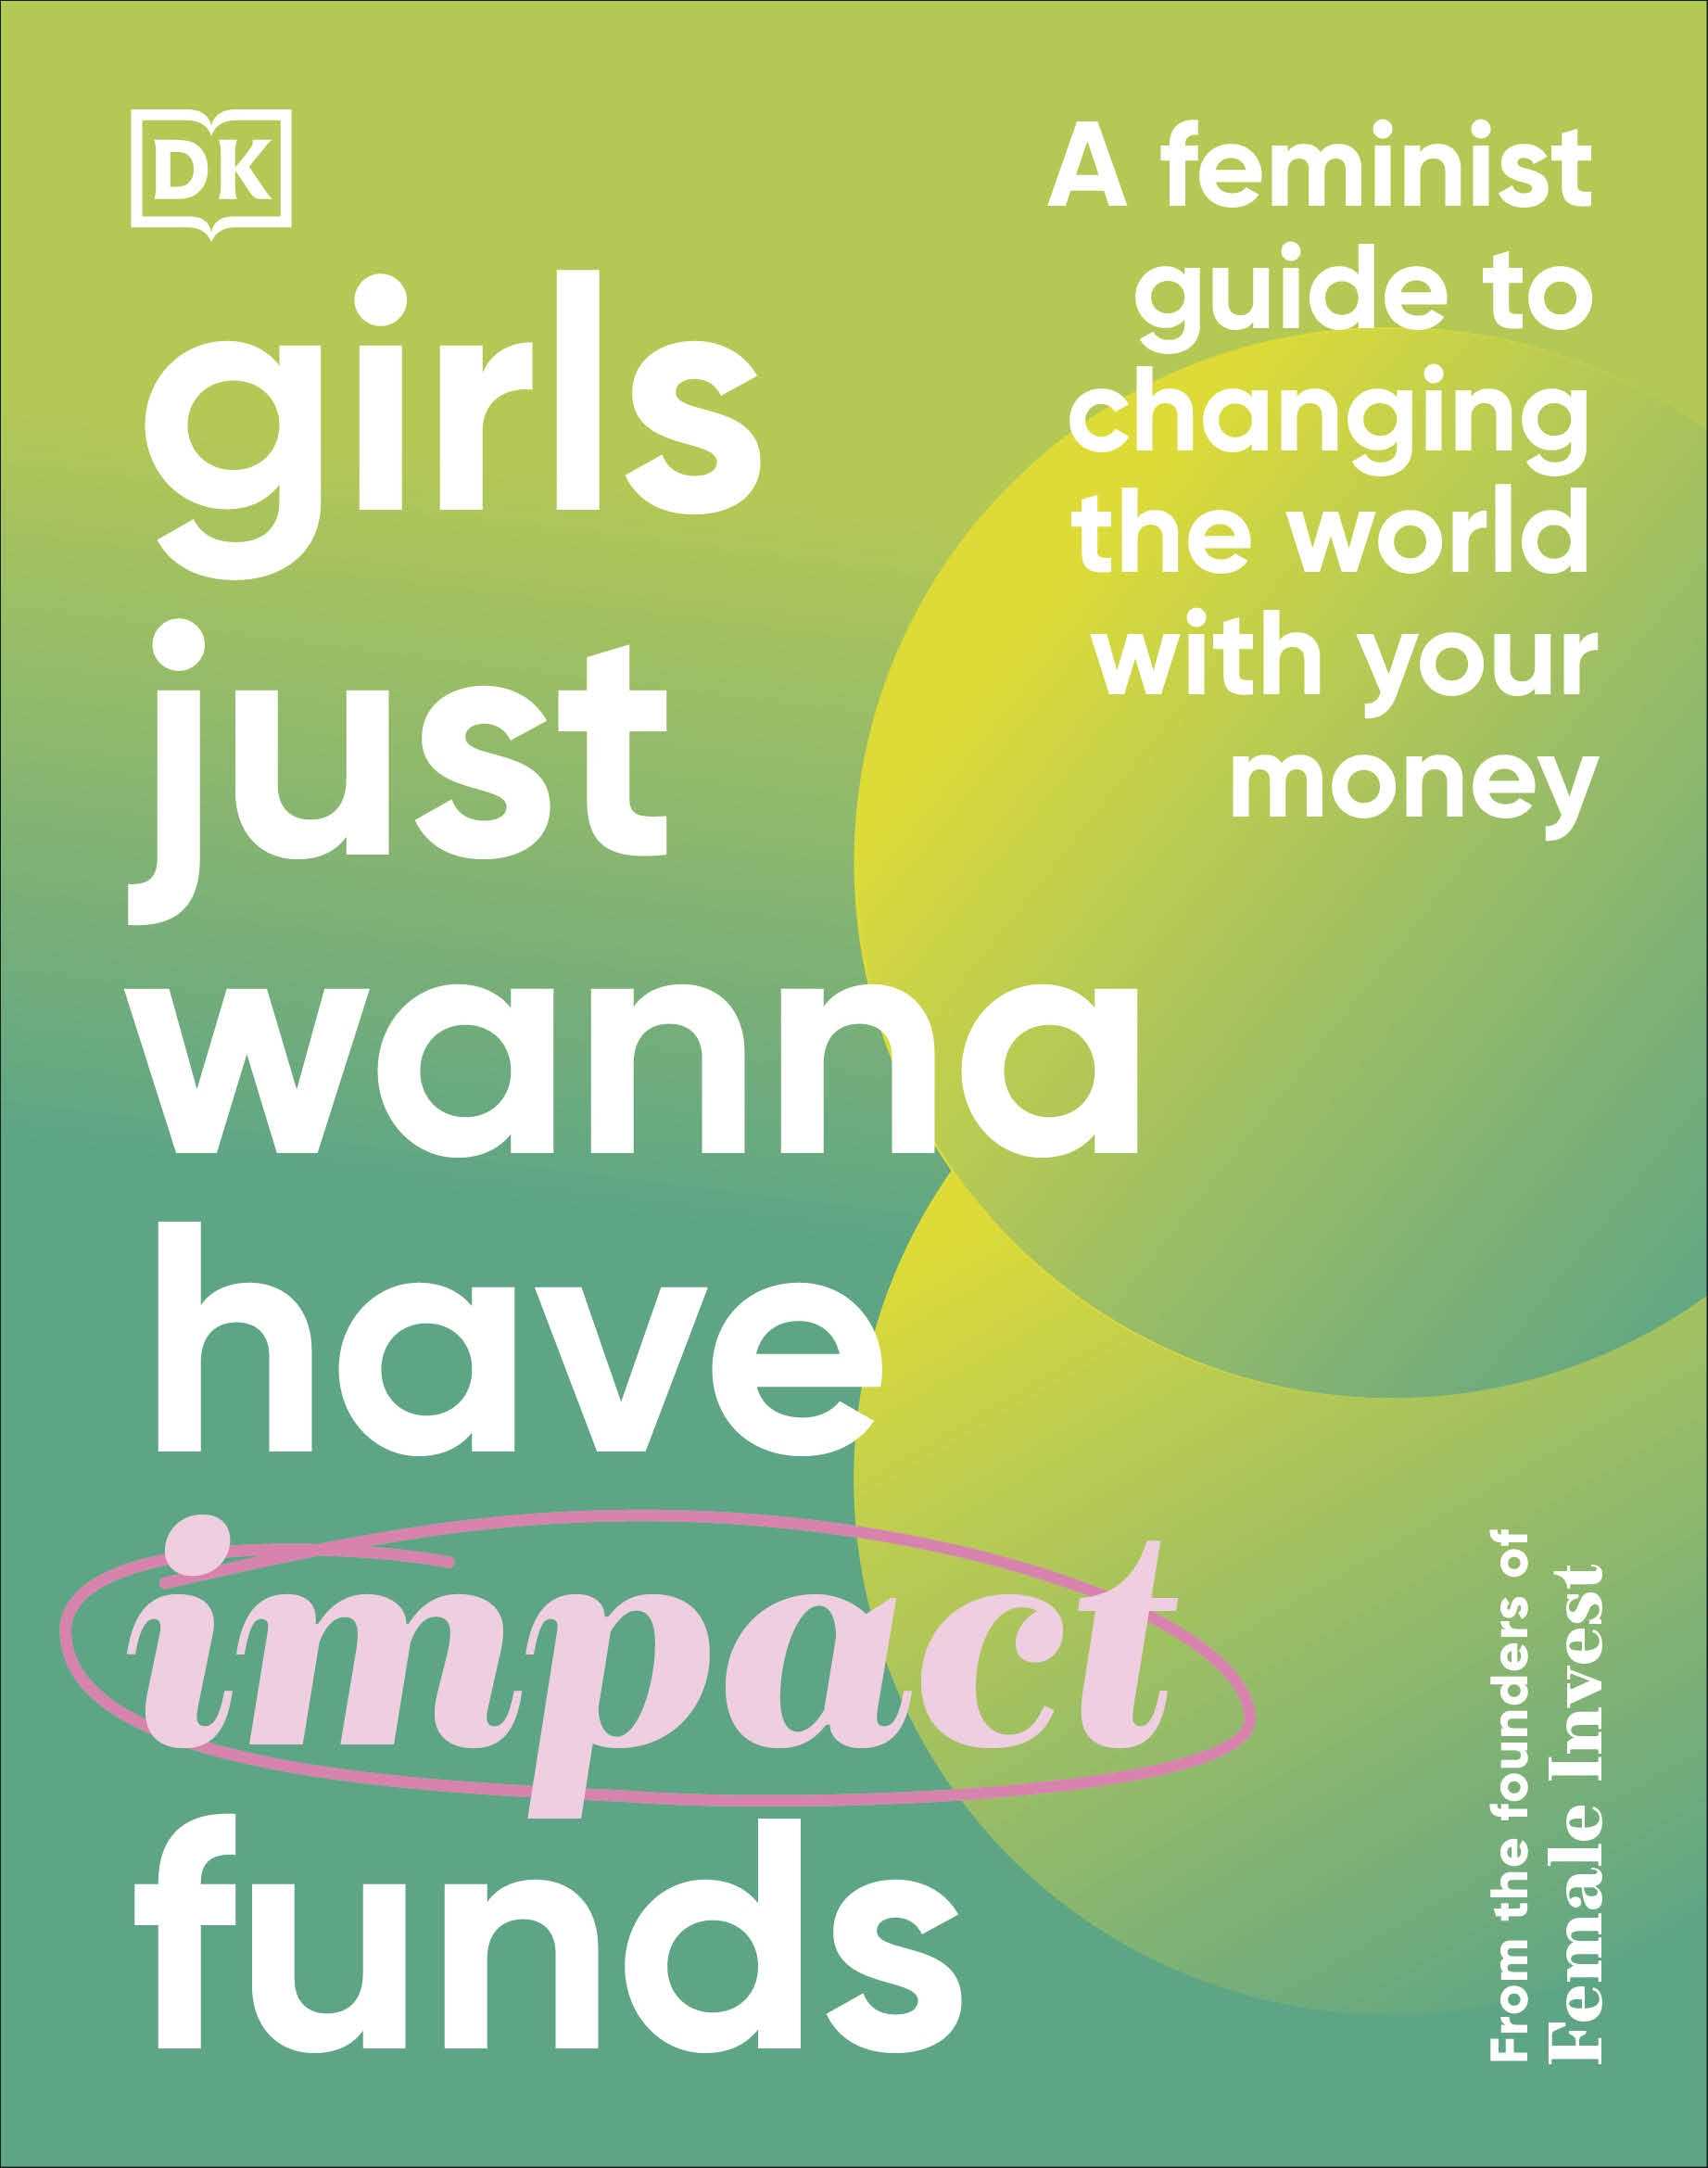 Girls Just Wanna Have Impact Funds